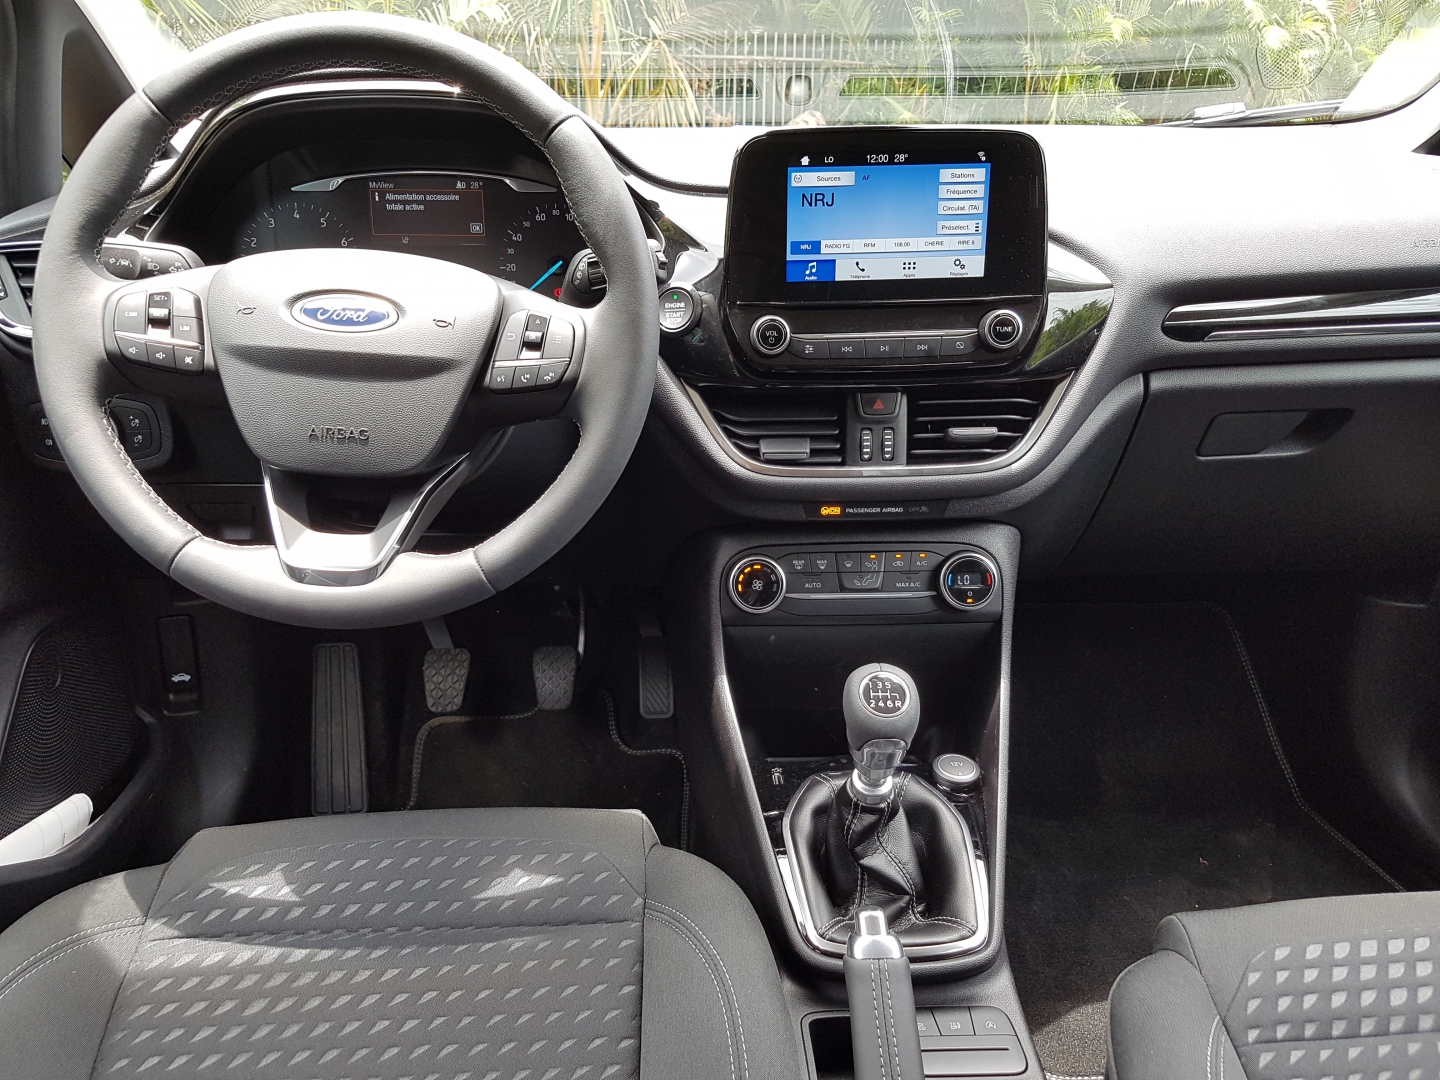 Ford Fiesta 10 Ecoboost 100ch Guide Indépendant Dachats Auto Et